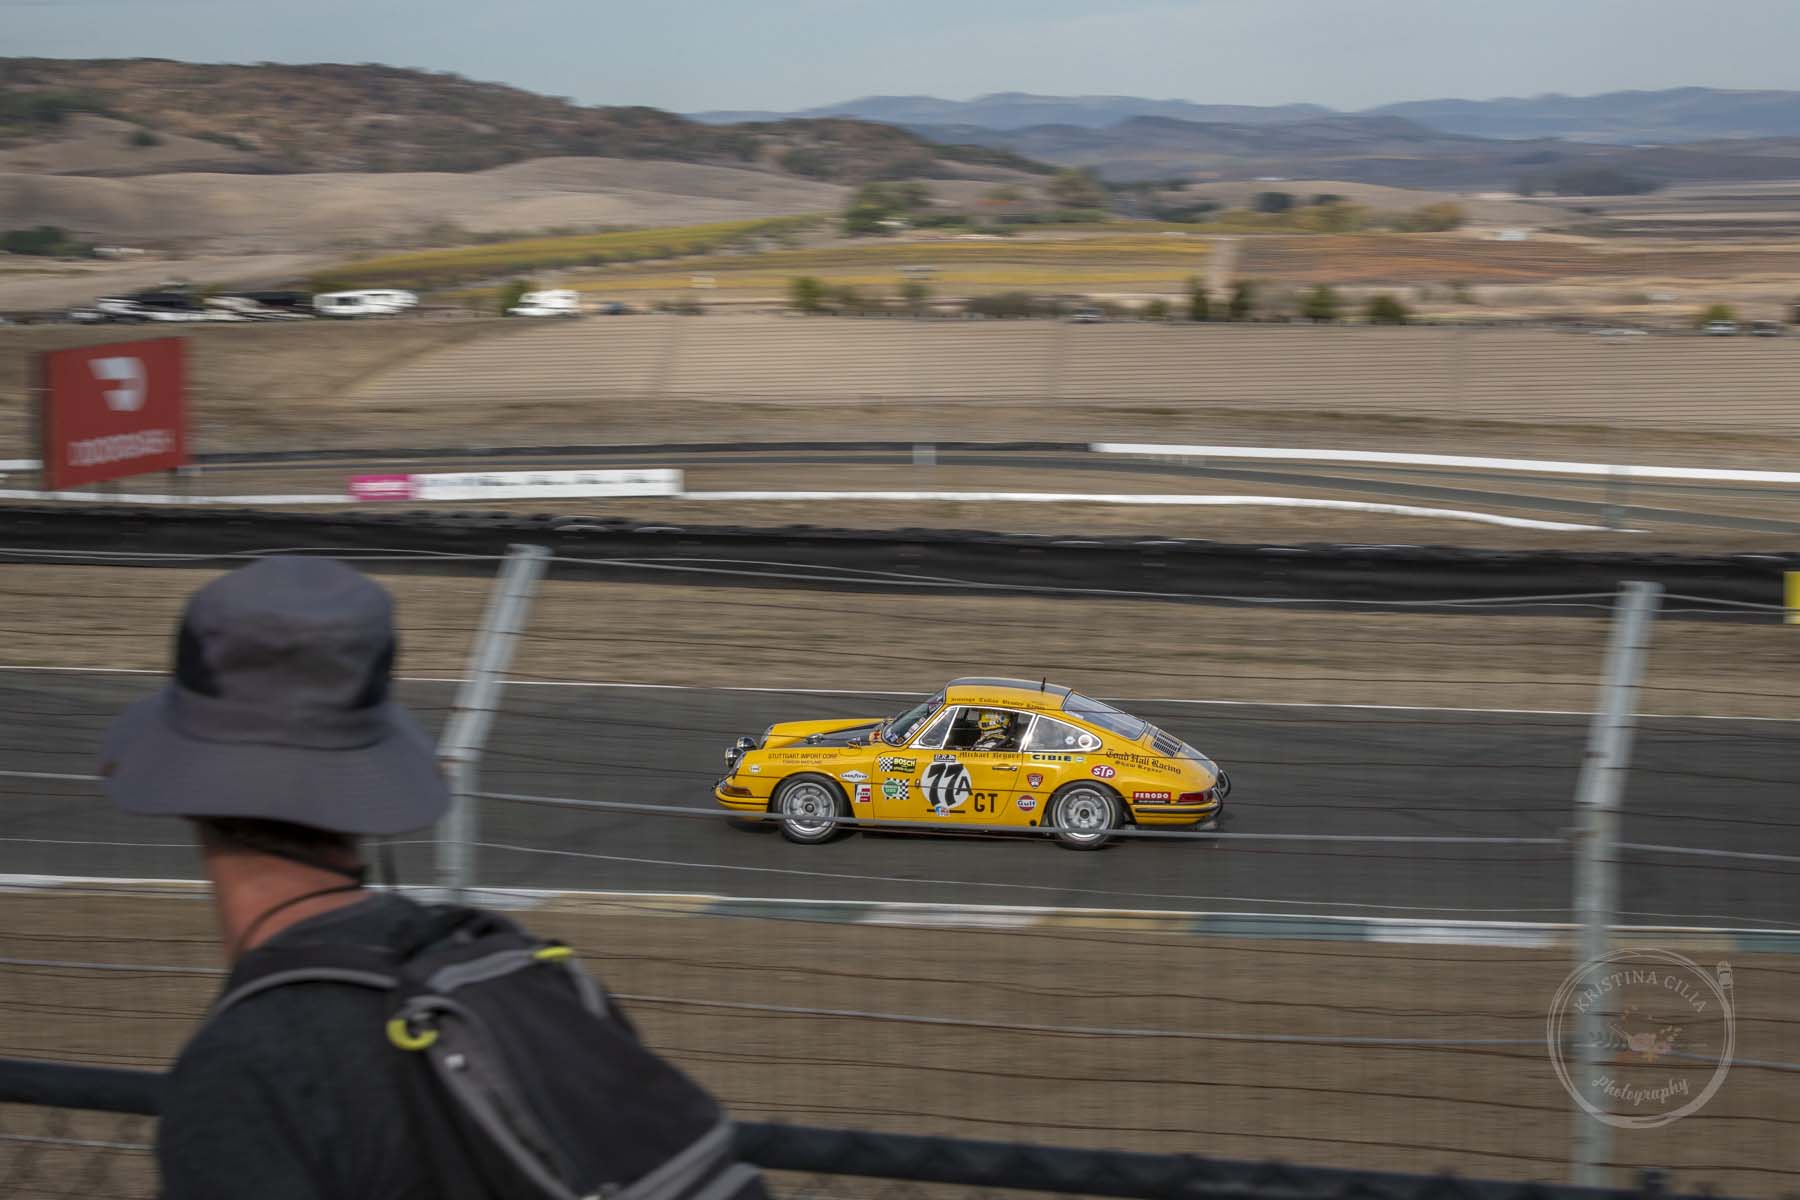 Kevin Buckley heads towards Turn 3 in a 1967 911S